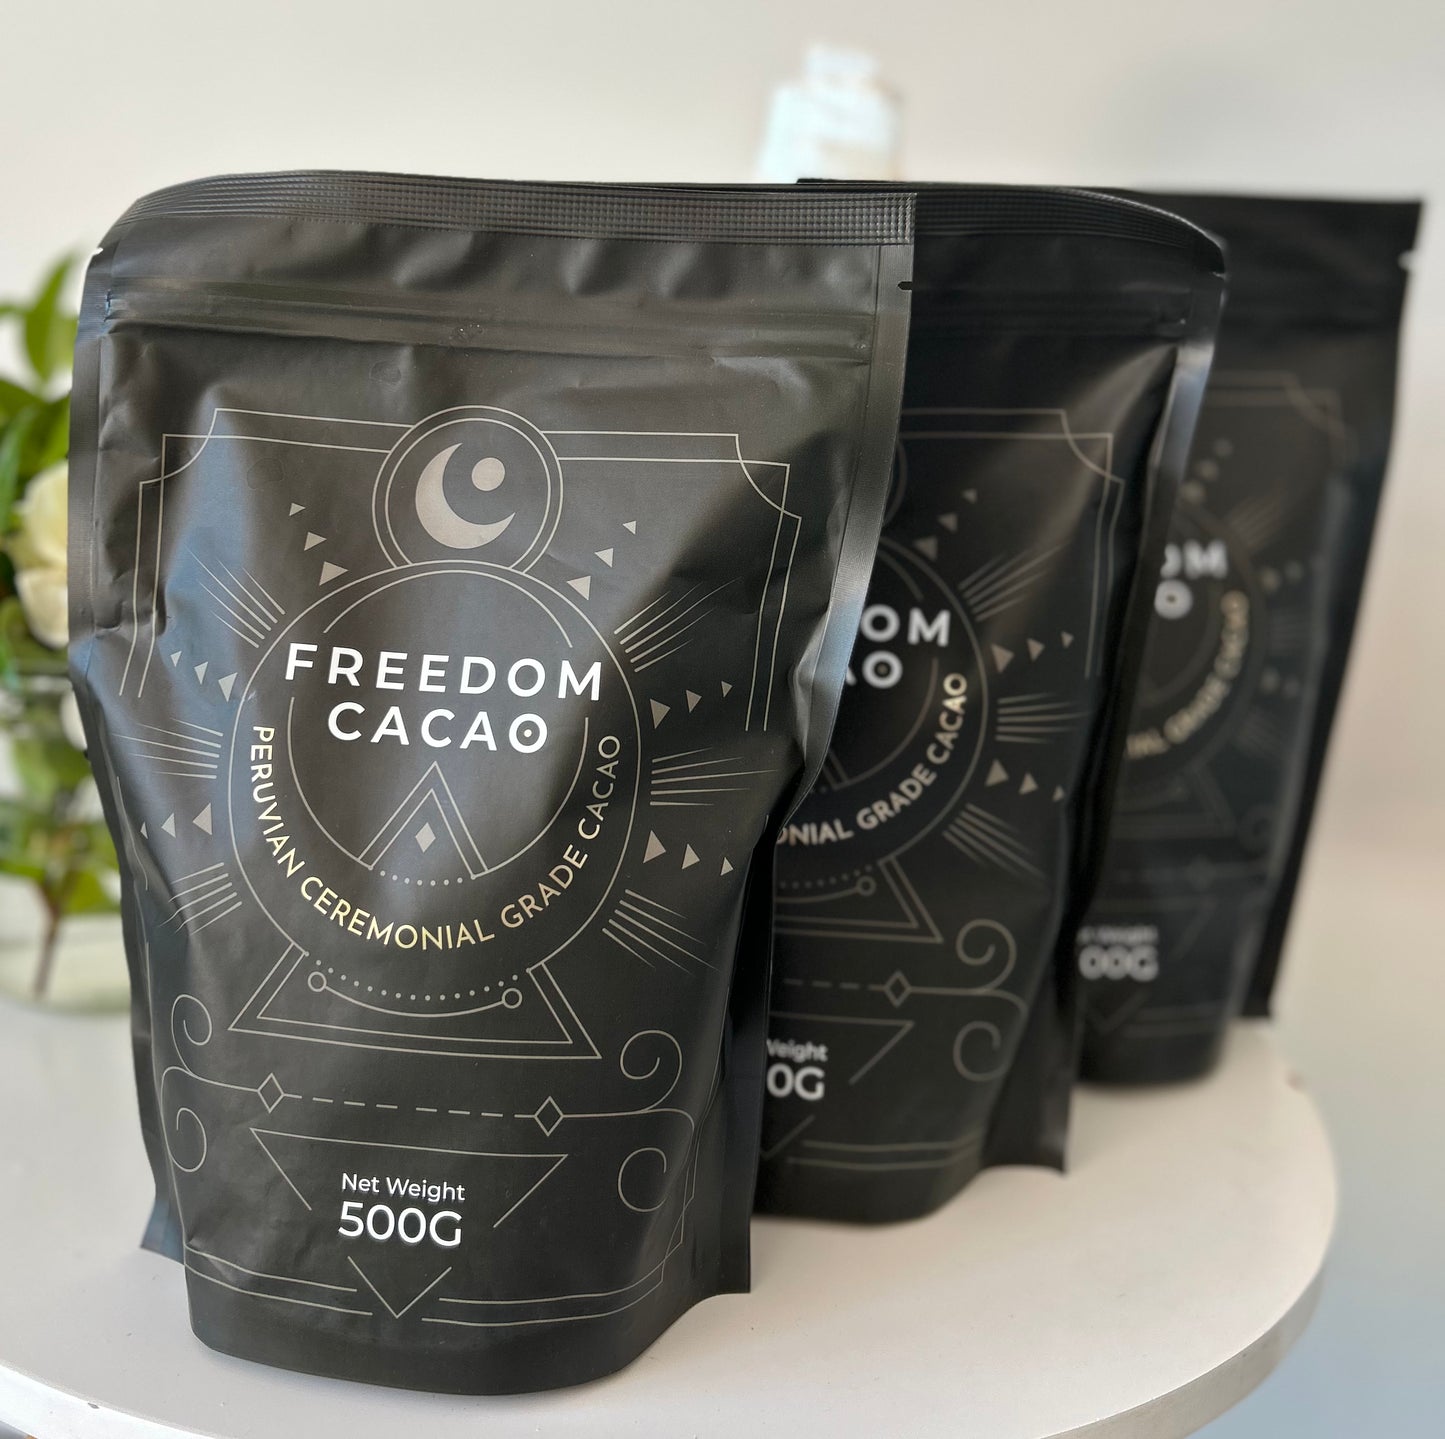 Freedom Cacao x 3 Bags